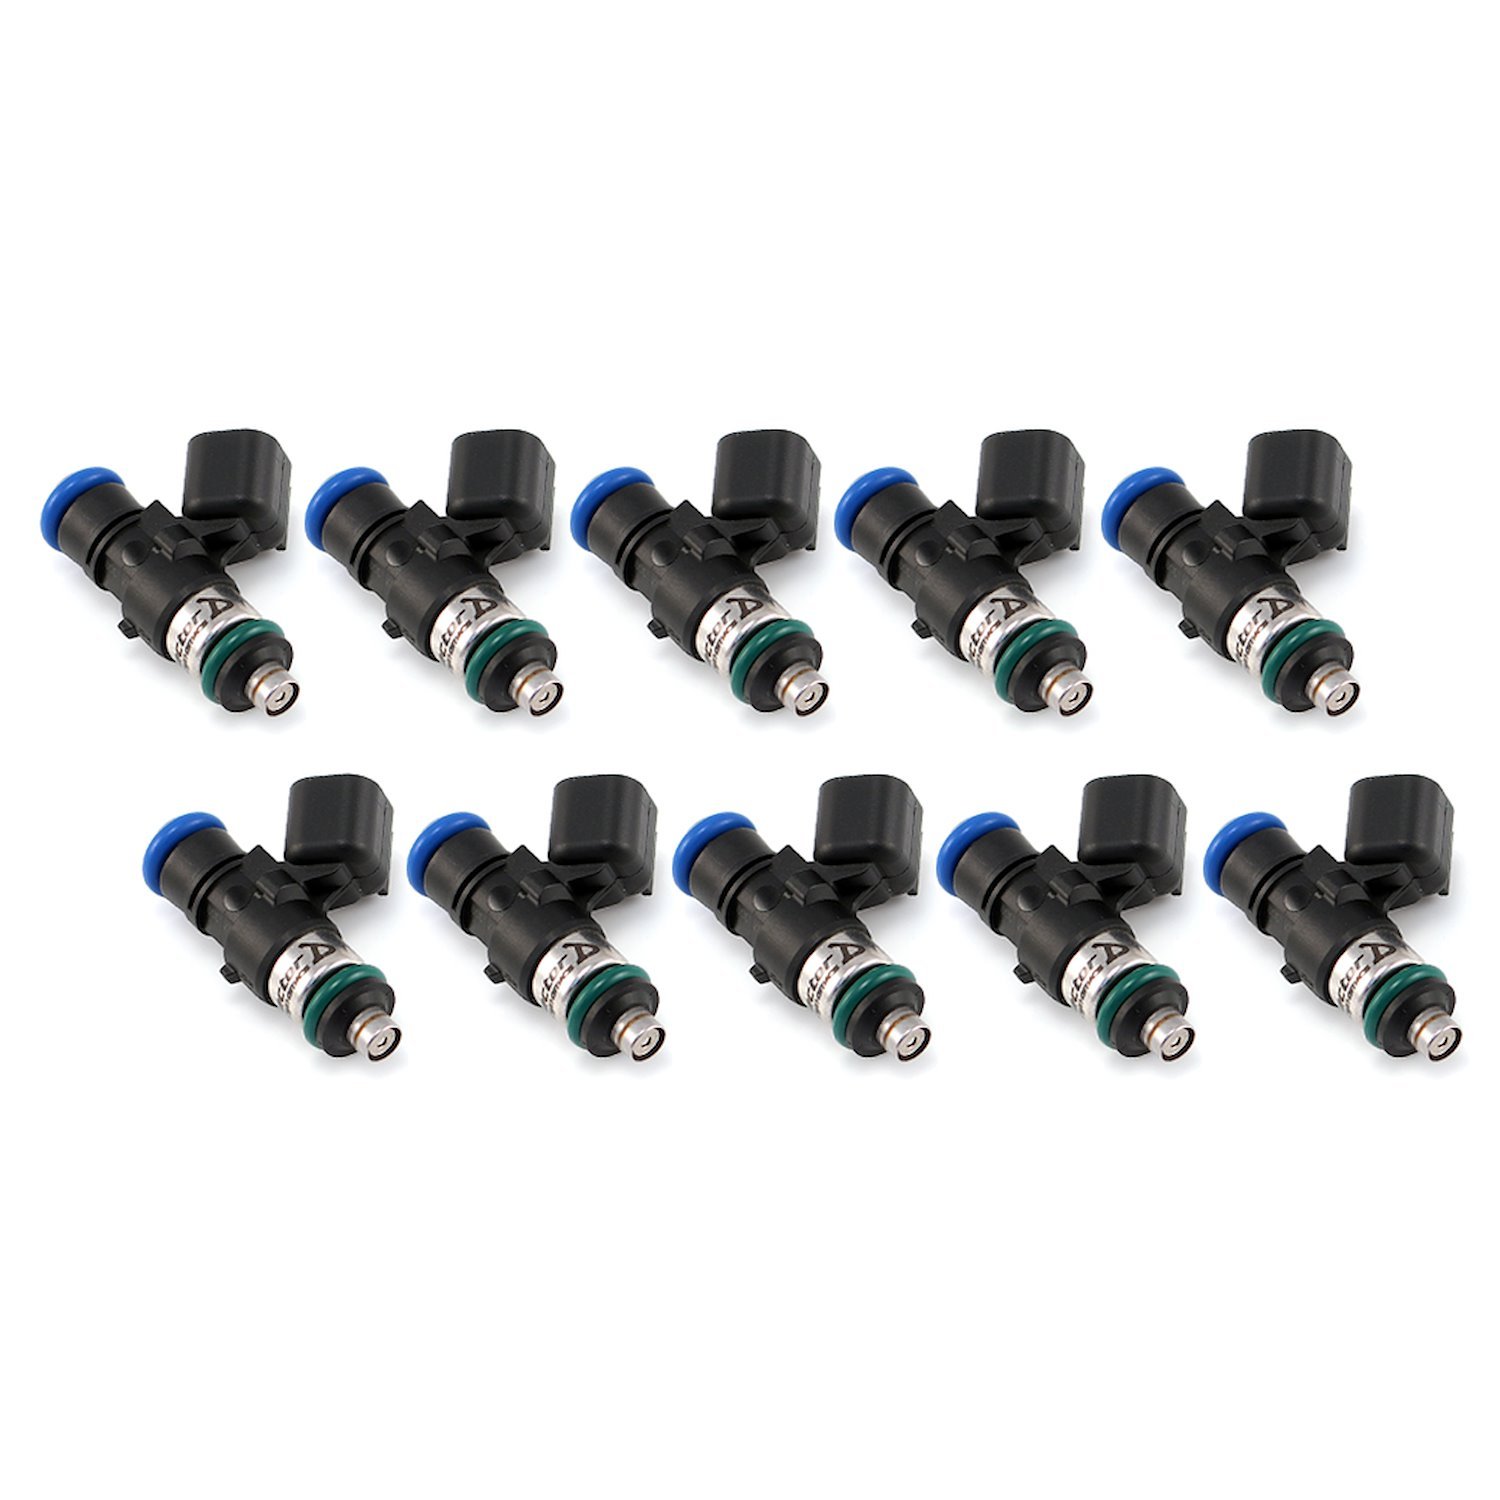 1050.34.14.14.10 1050cc Fuel Injector Set, 34 mm Length (No adapter Top), 14 mm Lower O-Ring